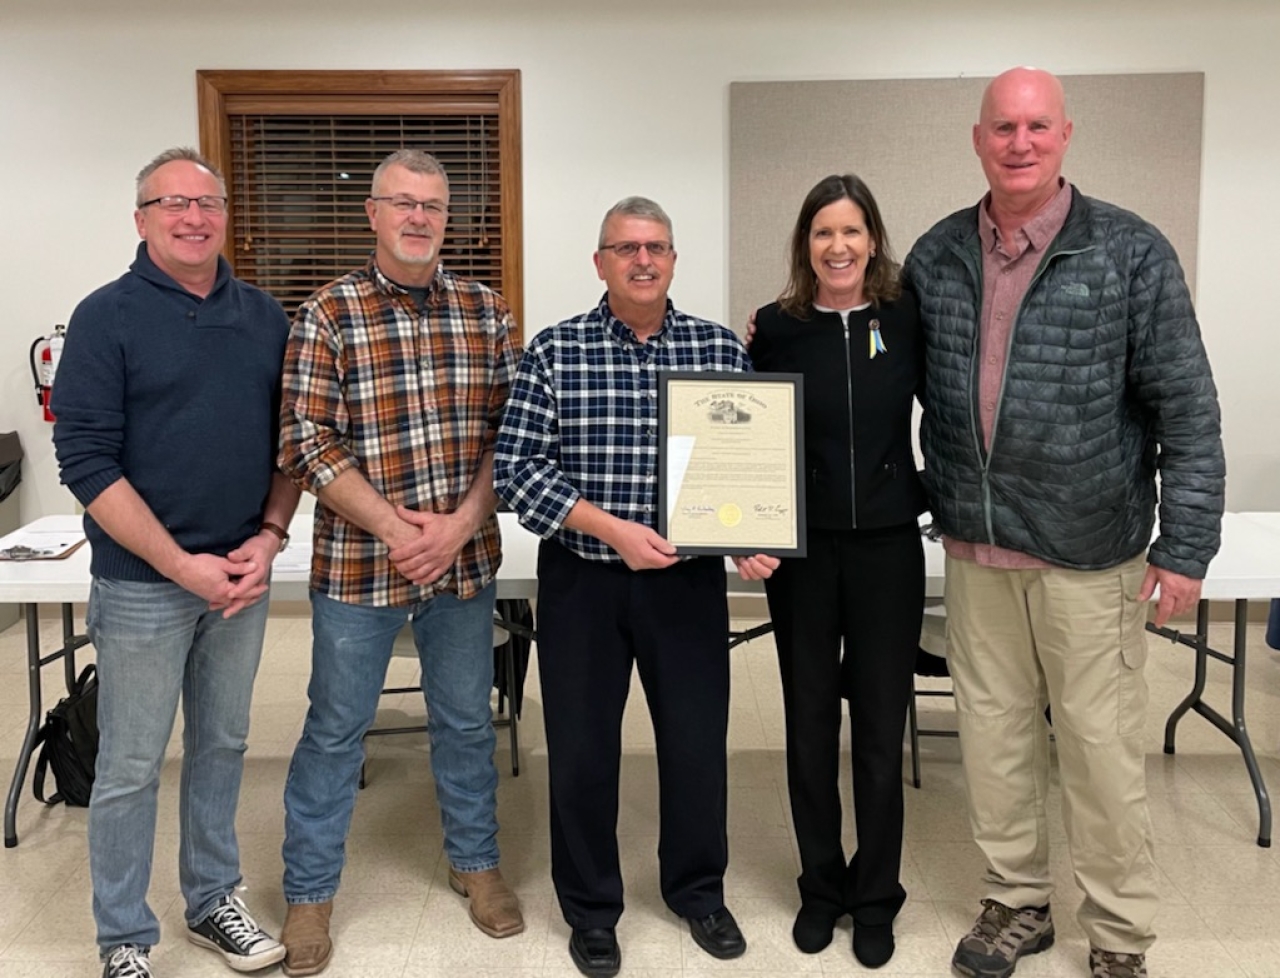 Representative Richardson visited with the Liberty Township trustees and presented a commendation to the Liberty Township Fire Department for 75 years of service. It was a great honor!